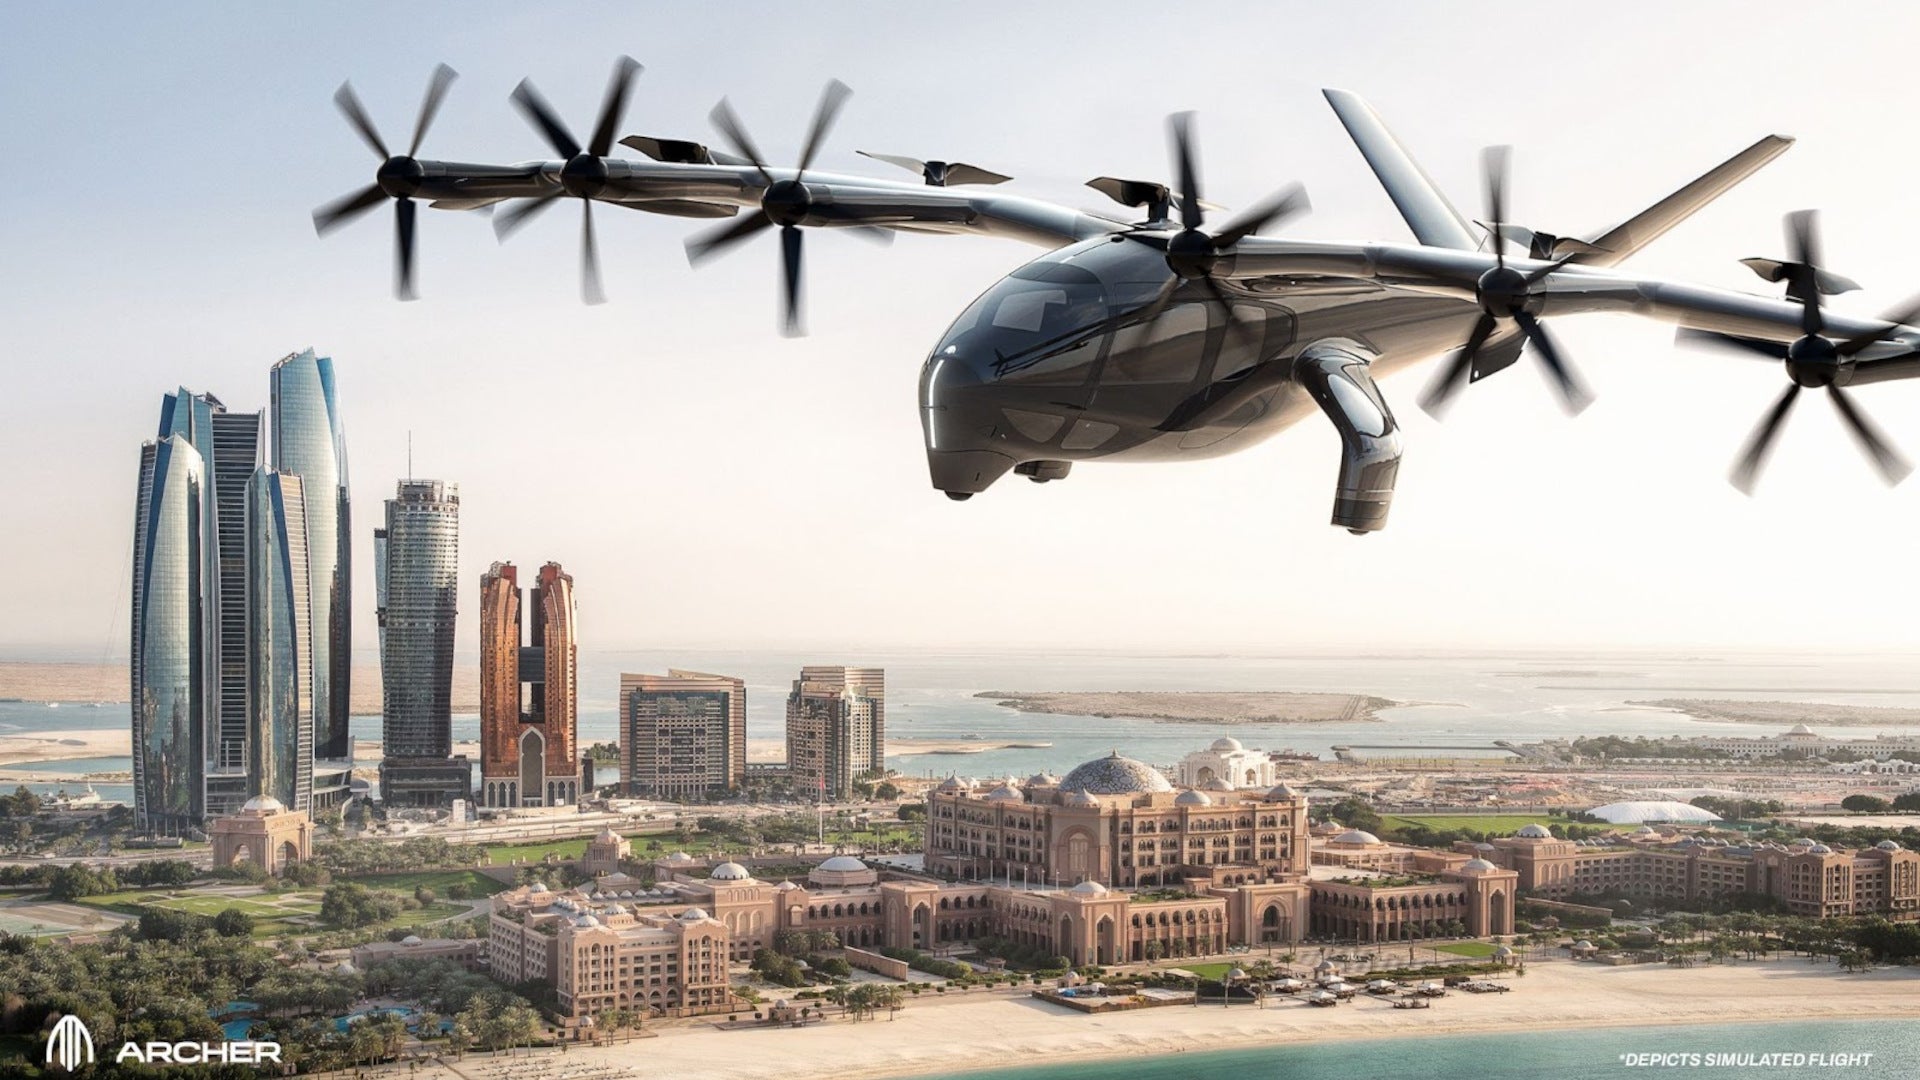 Archer Plans Sale of 100 Electric Air Taxis to UAE’s Air Chateau, Its Third Commercial Customer